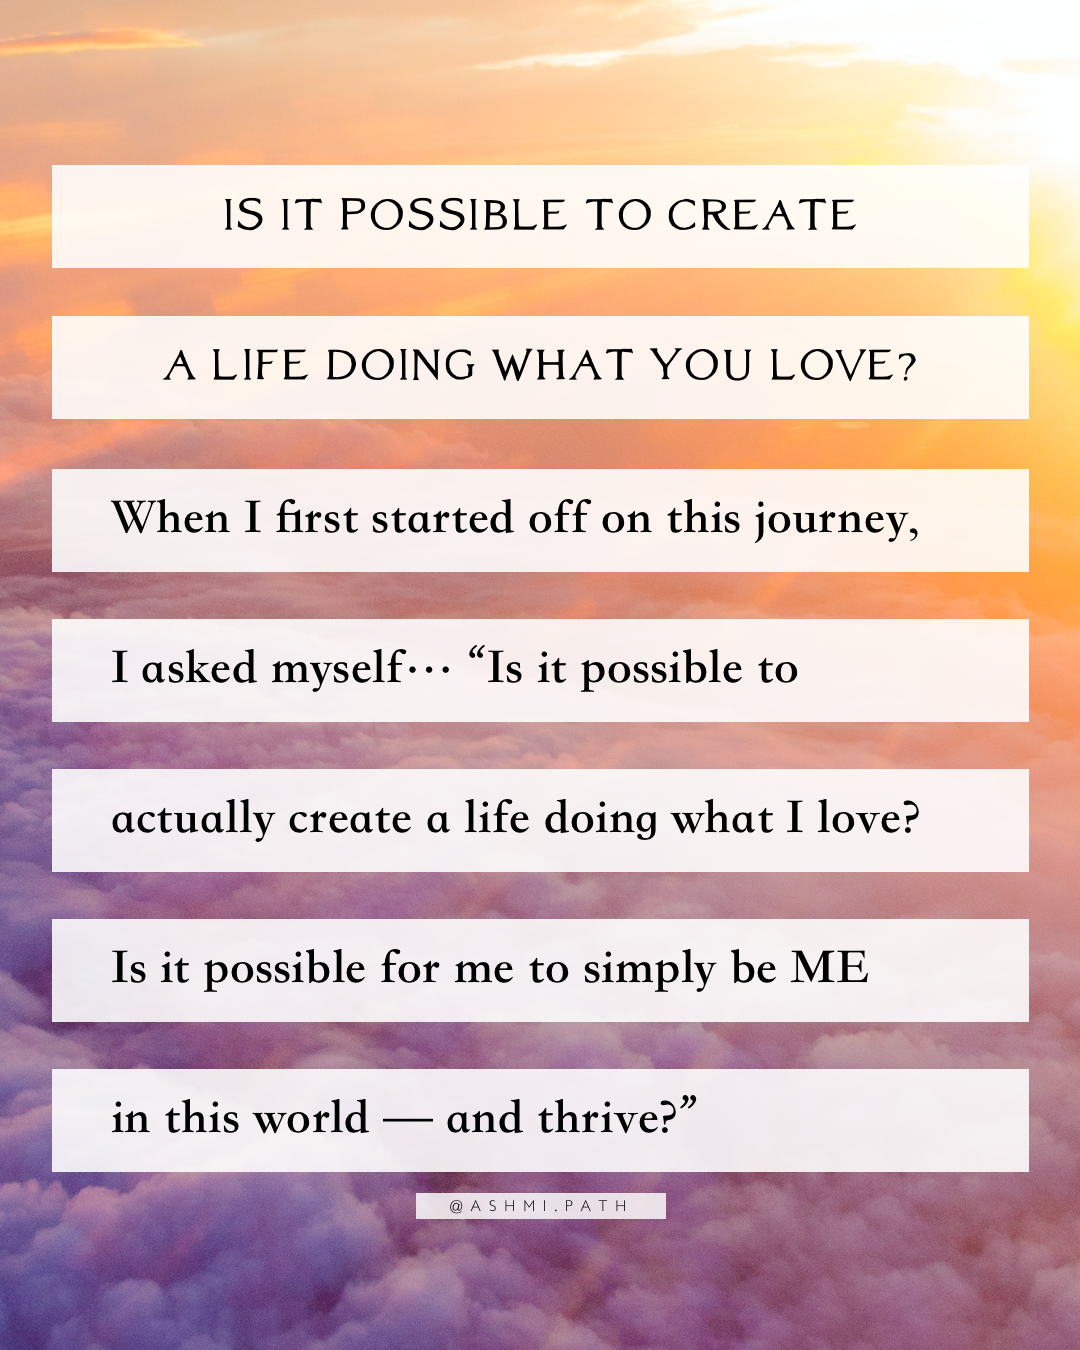 Create a Life Doing What You Love ~ The course is finally here!